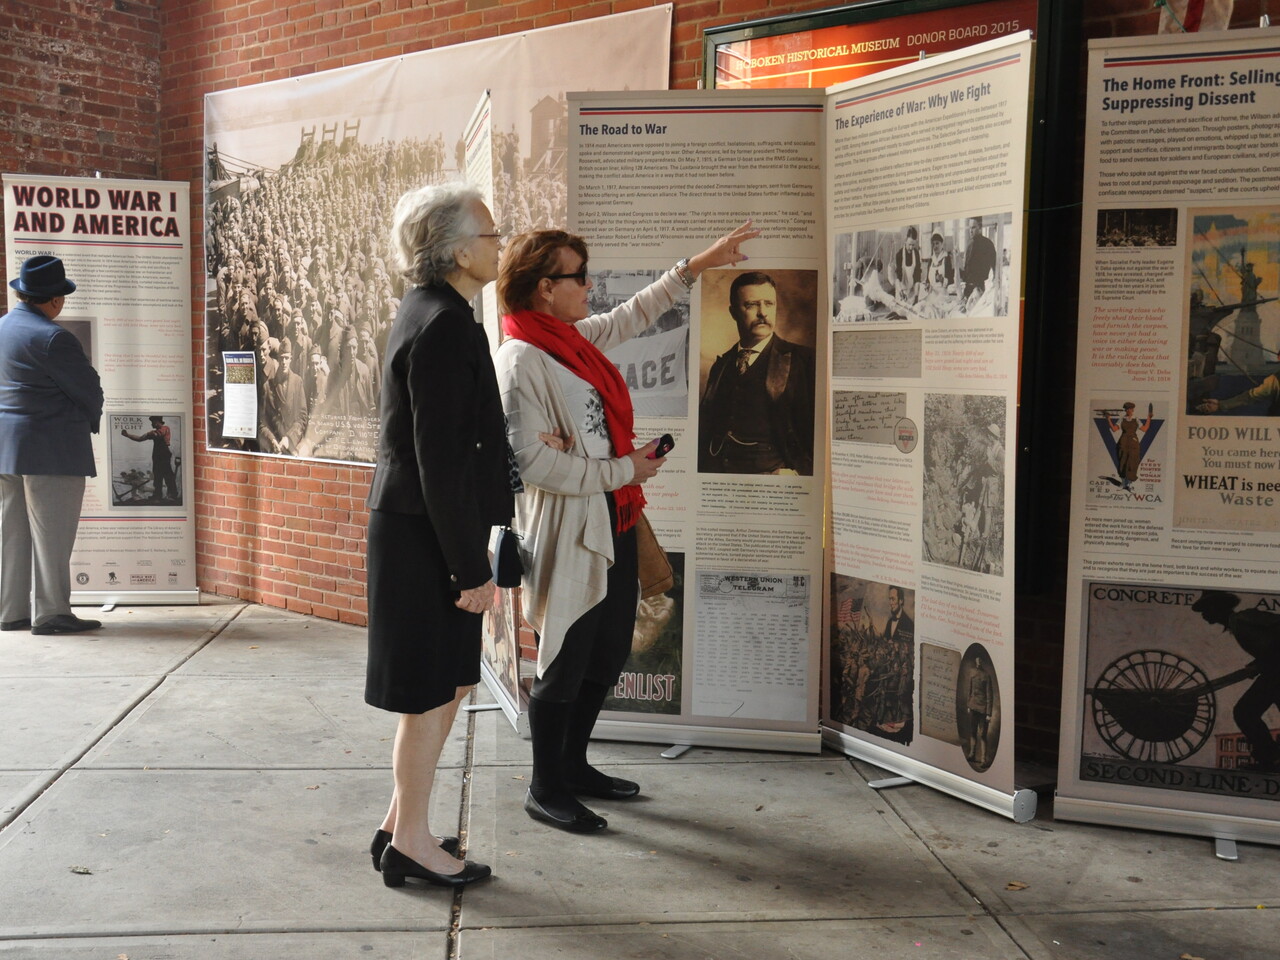 Two people view the WWI exhibition on display